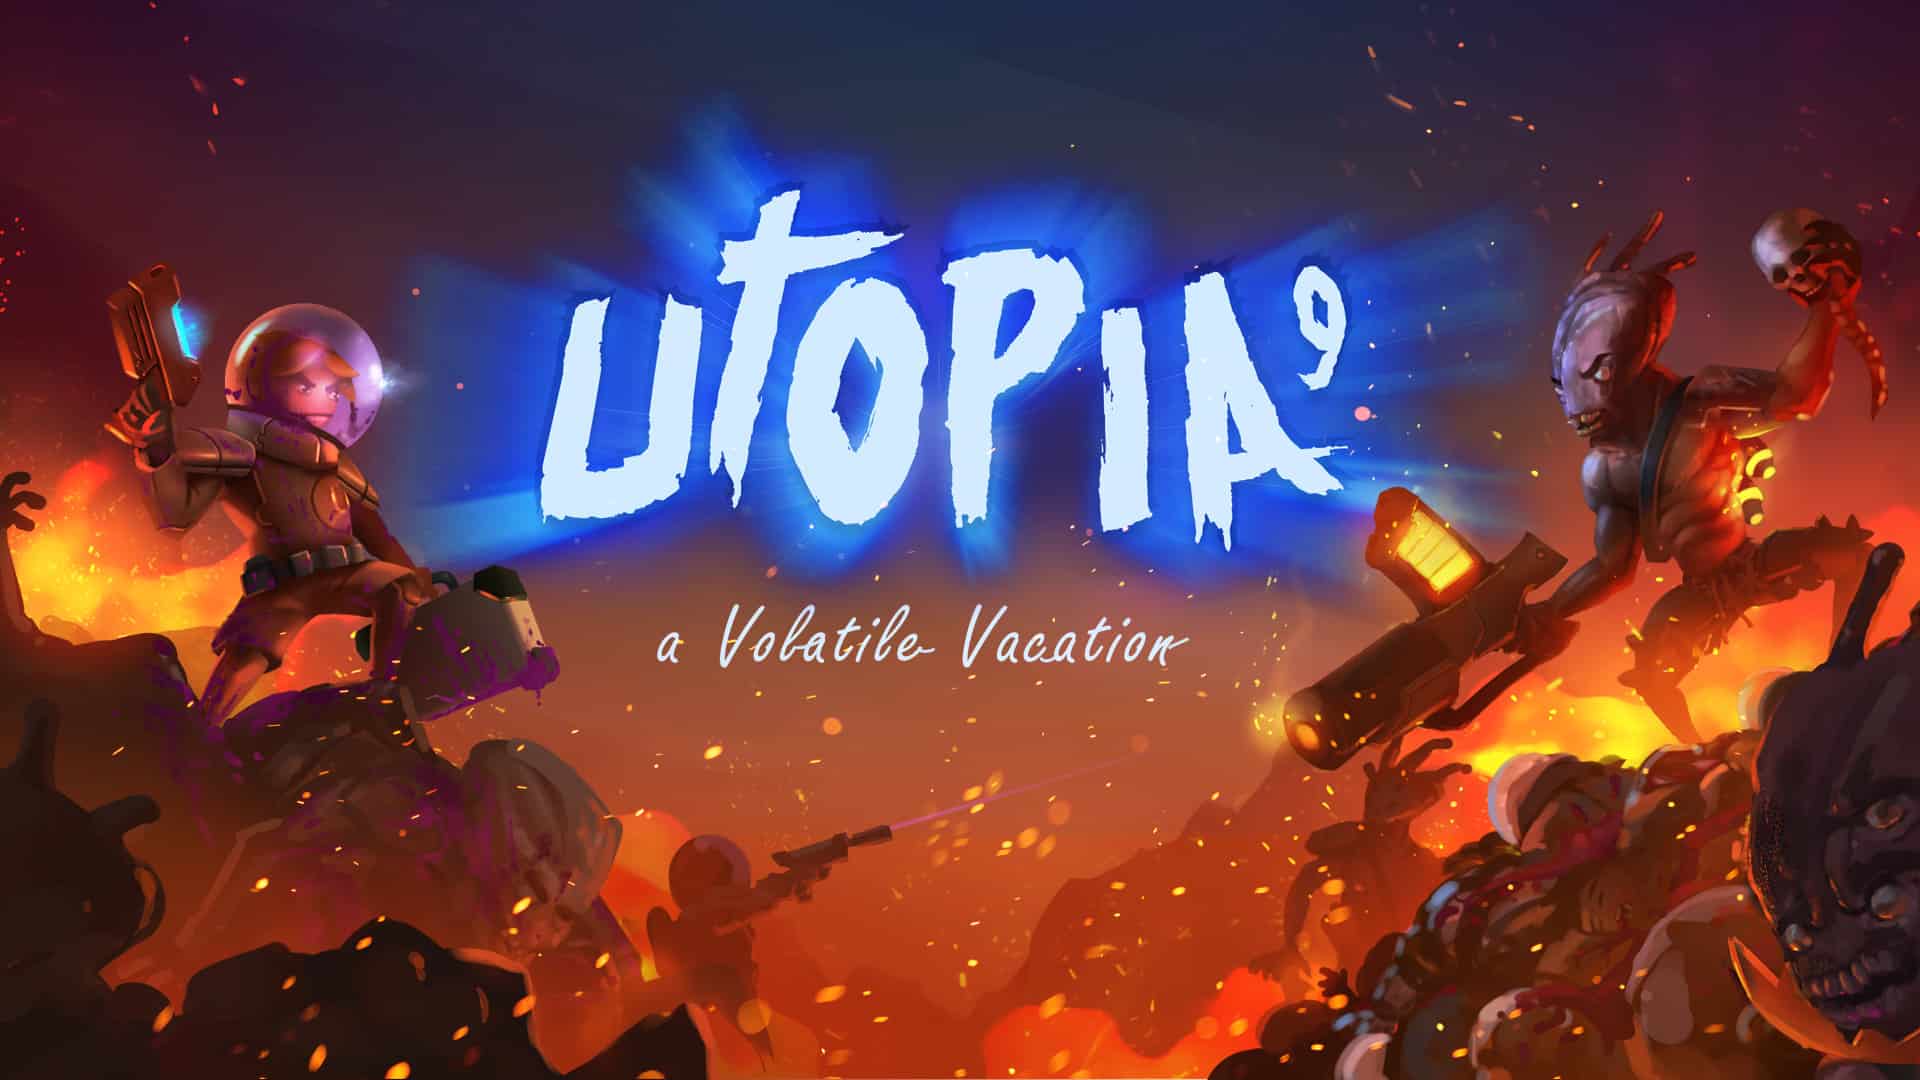 Utopia 9: A Volatile Vacation player count stats